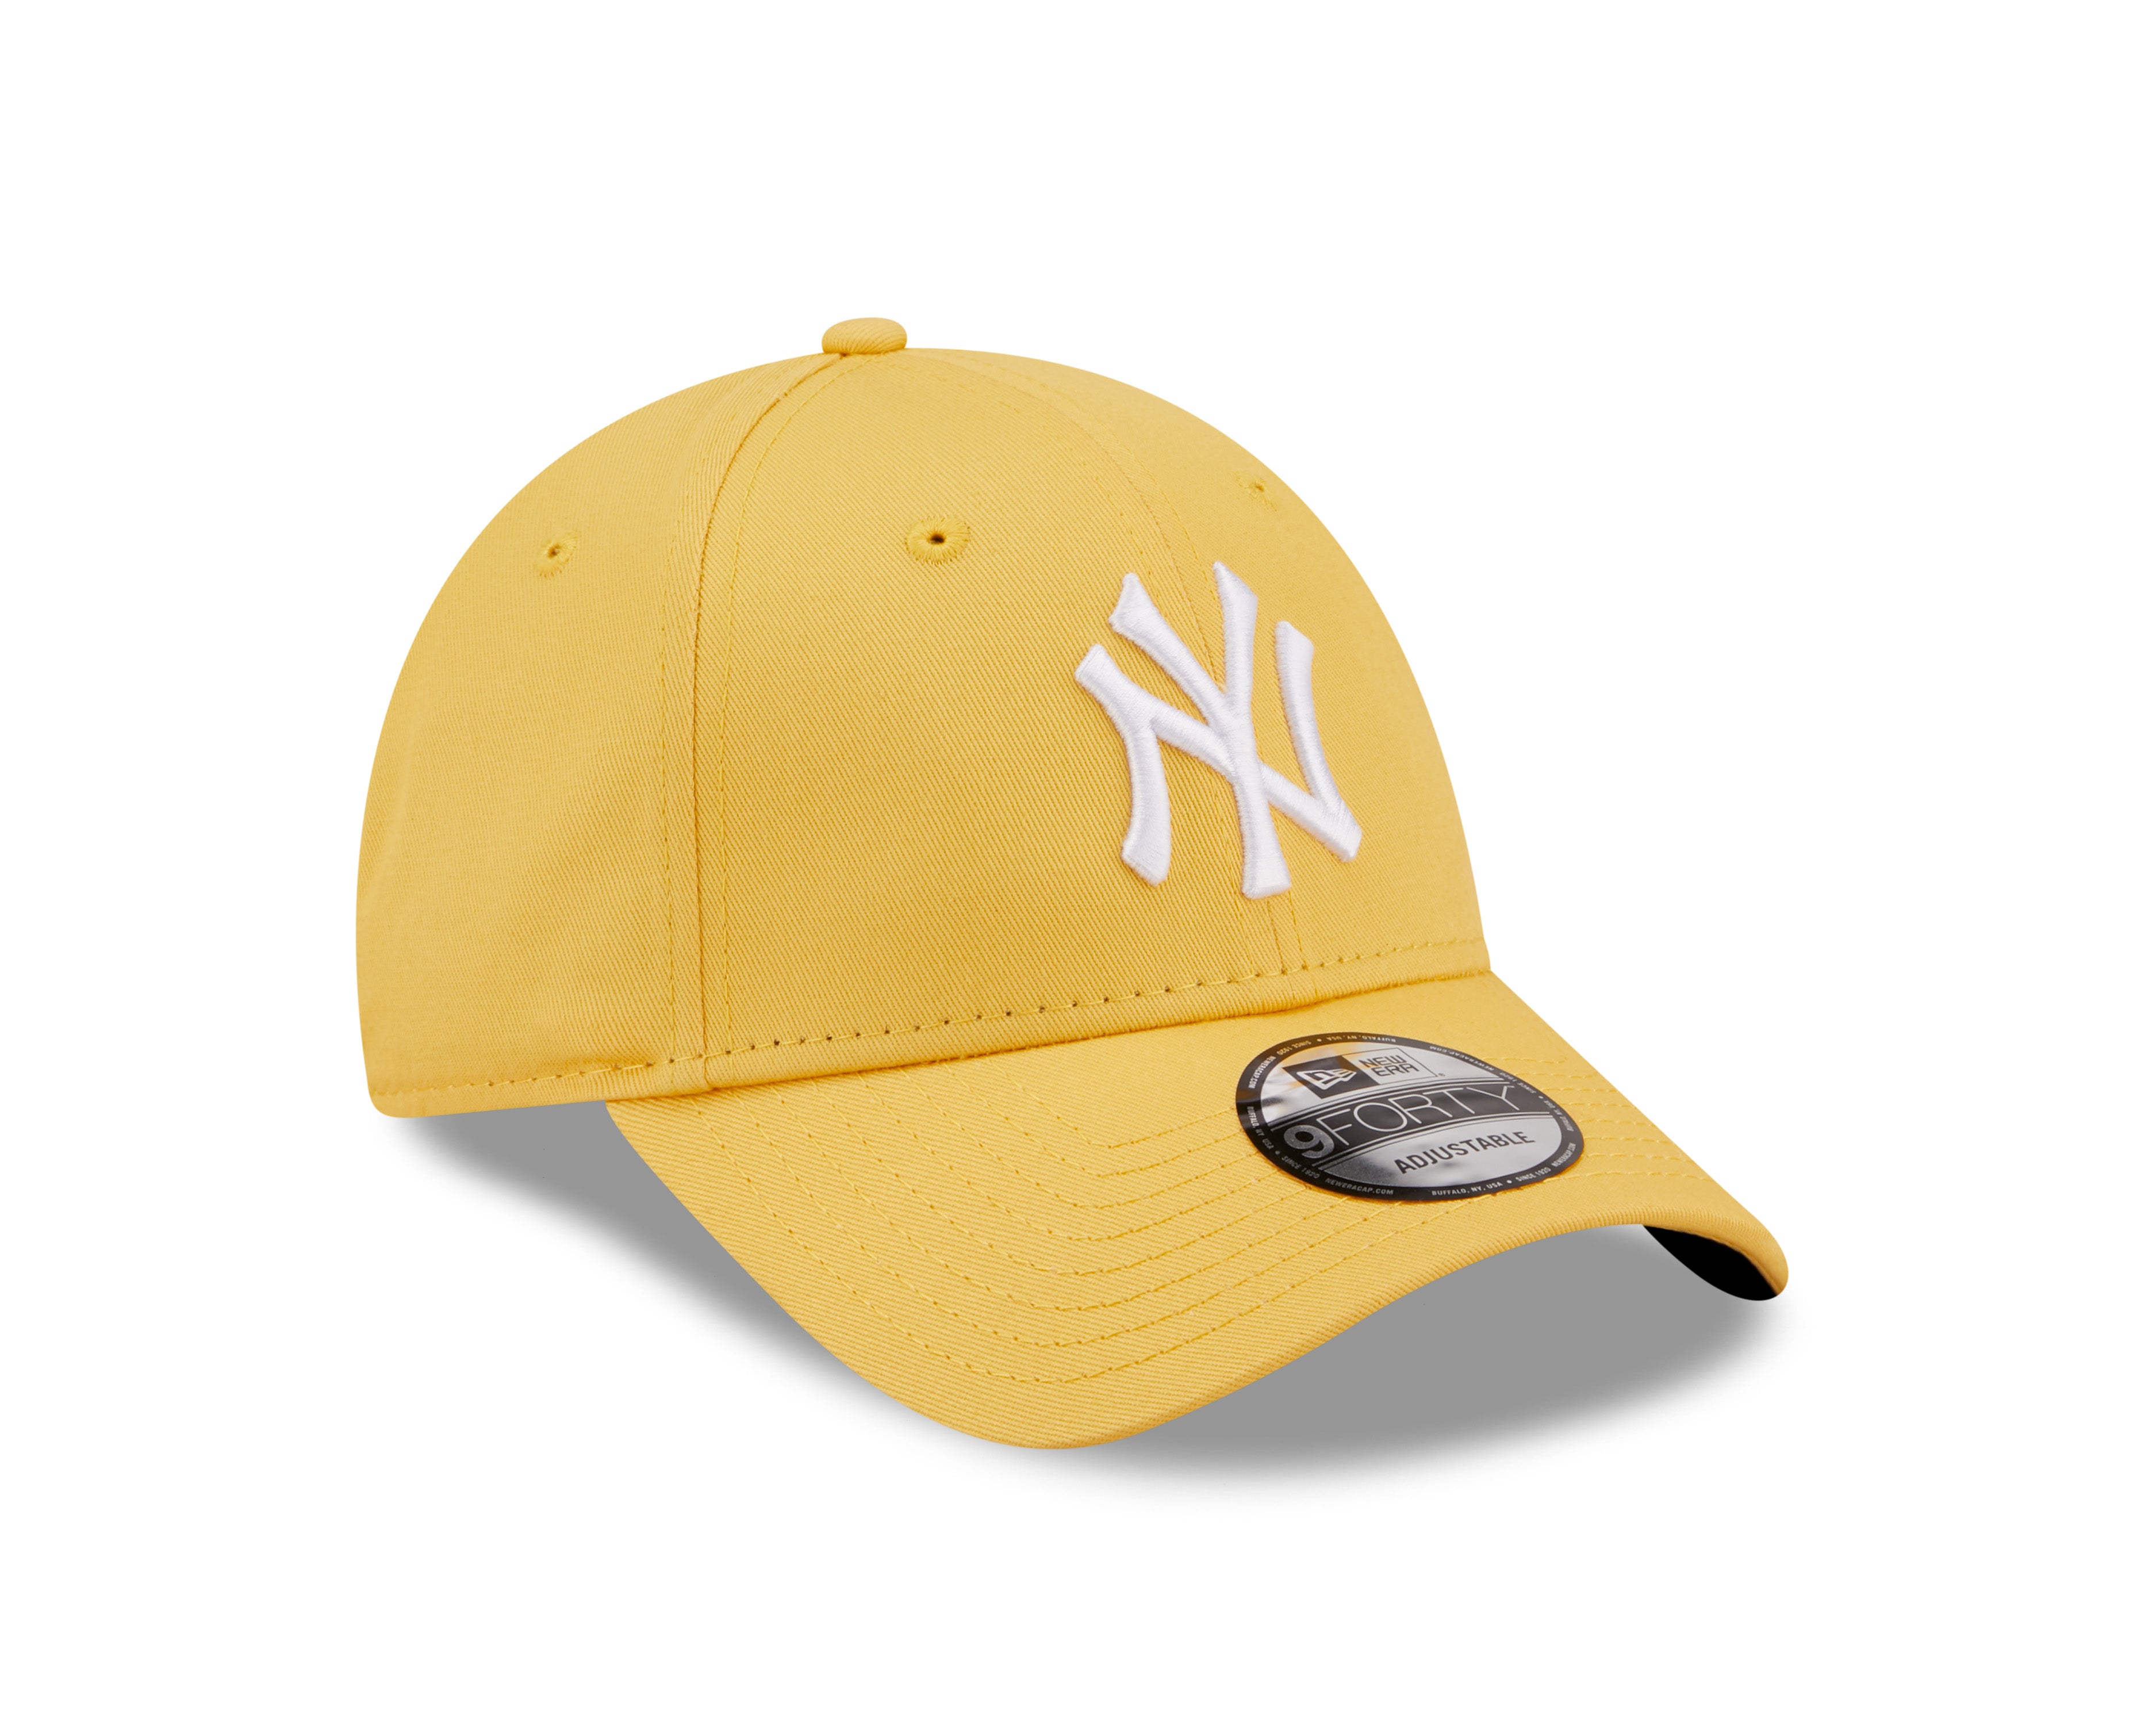 New York Yankees League Essential 9Forty - Yellow/White - Headz Up 